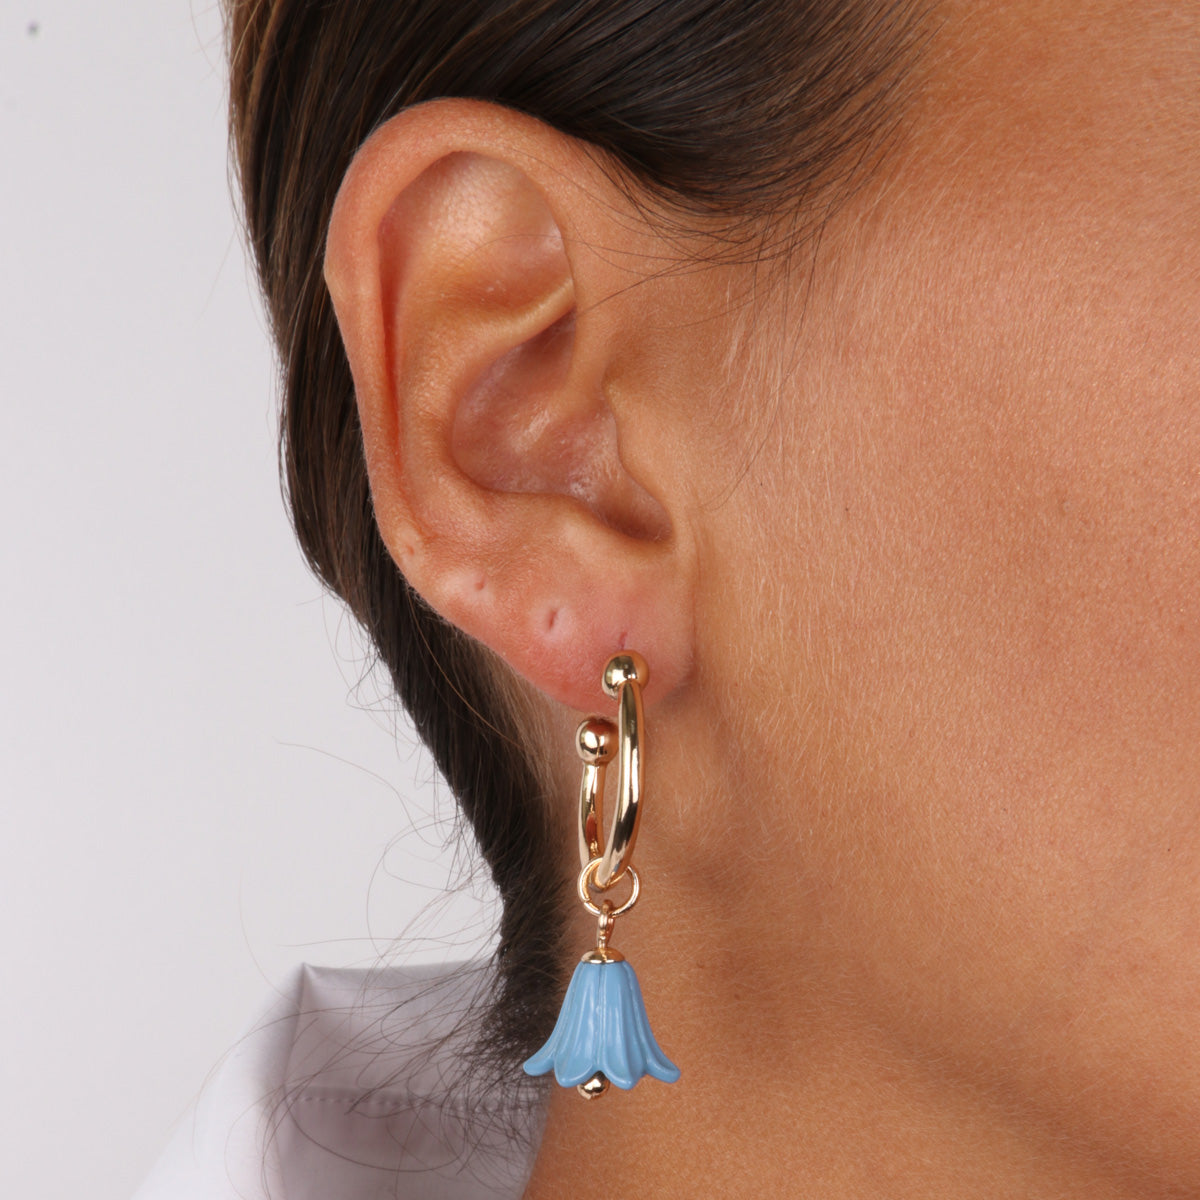 Semicarchie metal earrings with bell -shaped blue bell -shaped bells